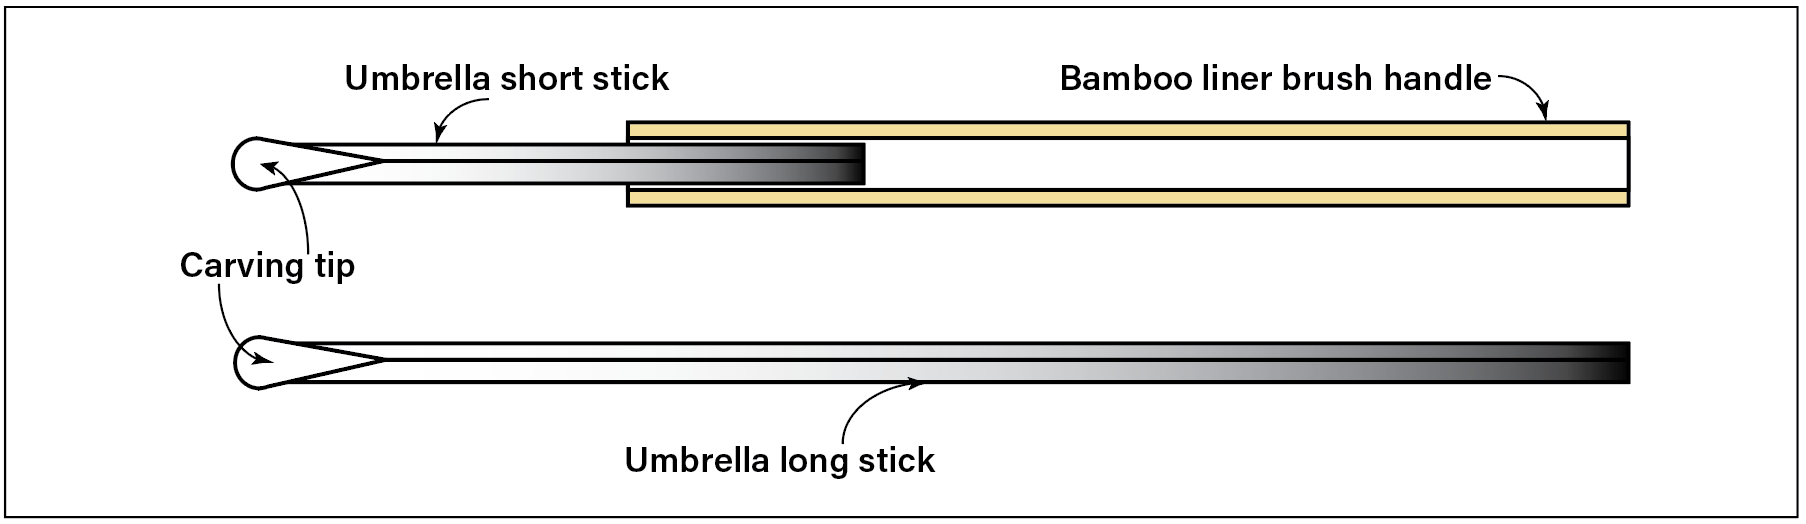 3 Assemble the tools as shown in the diagram, inserting shorter, shaped metal rods into the bamboo handles. Secure with adhesive or electrical tape. 